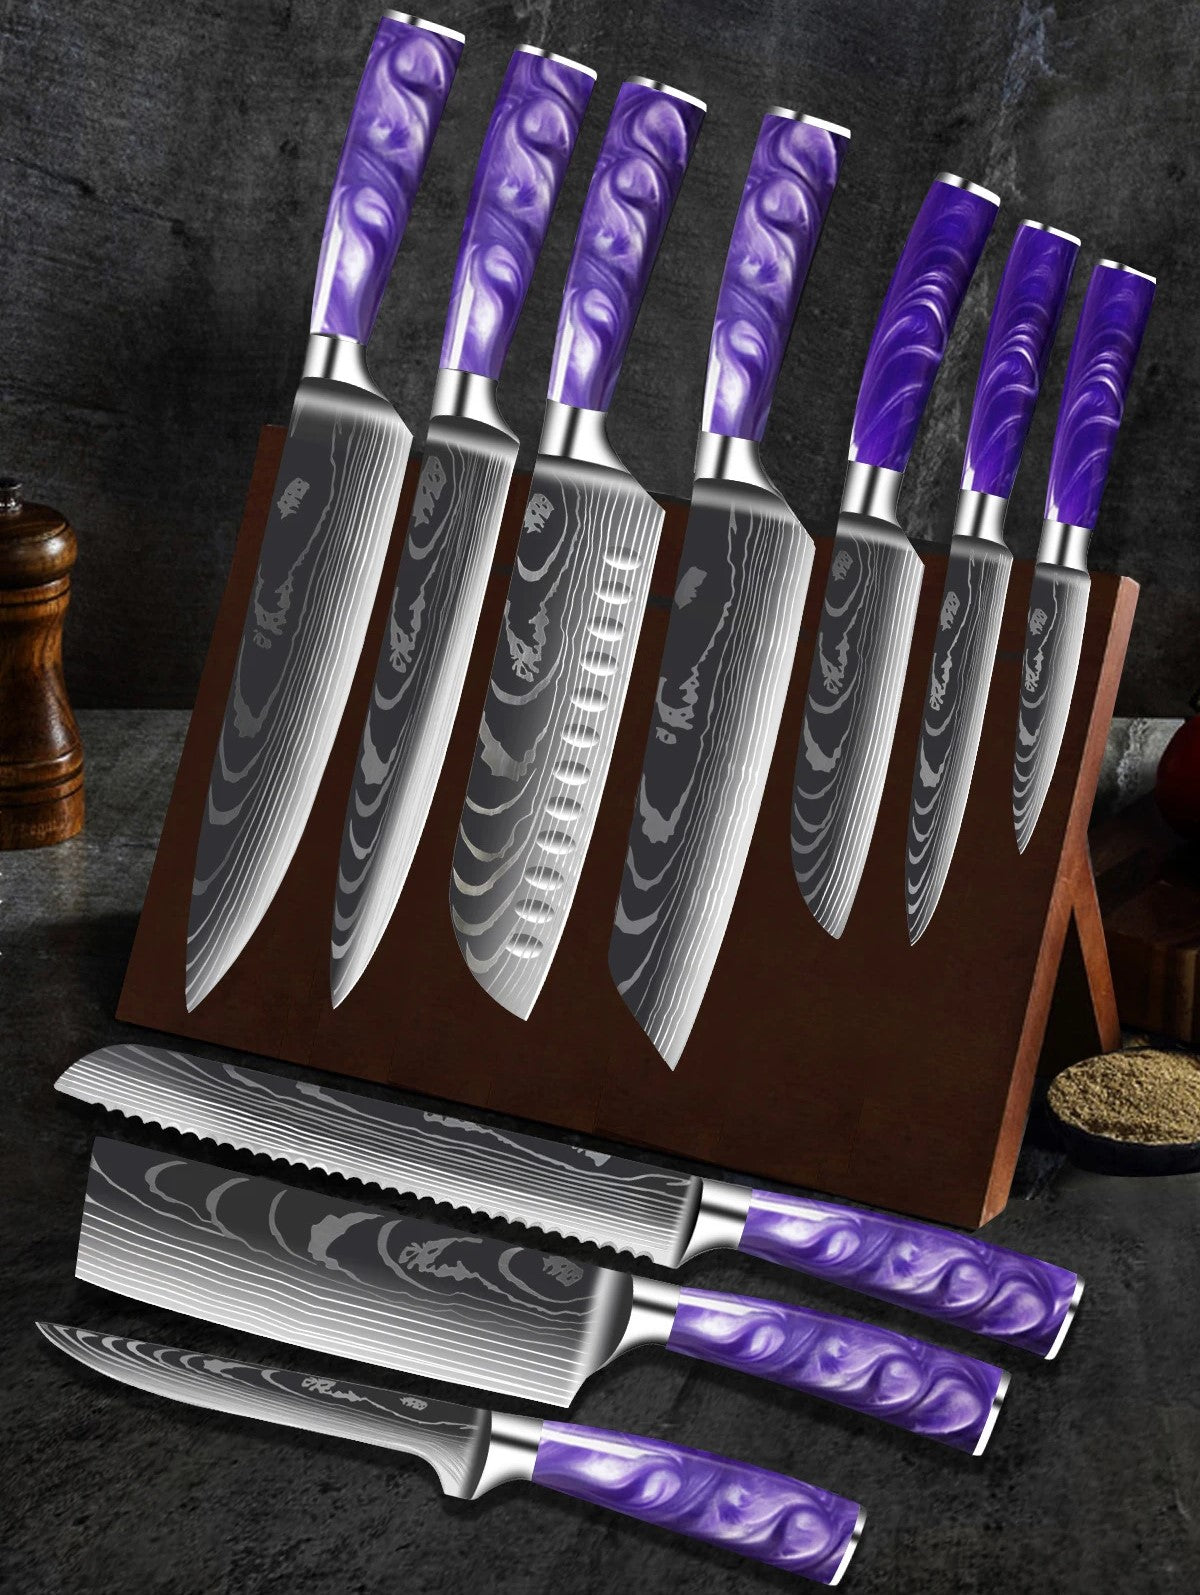 10-Piece Kitchen Knives Set With Resin Handle